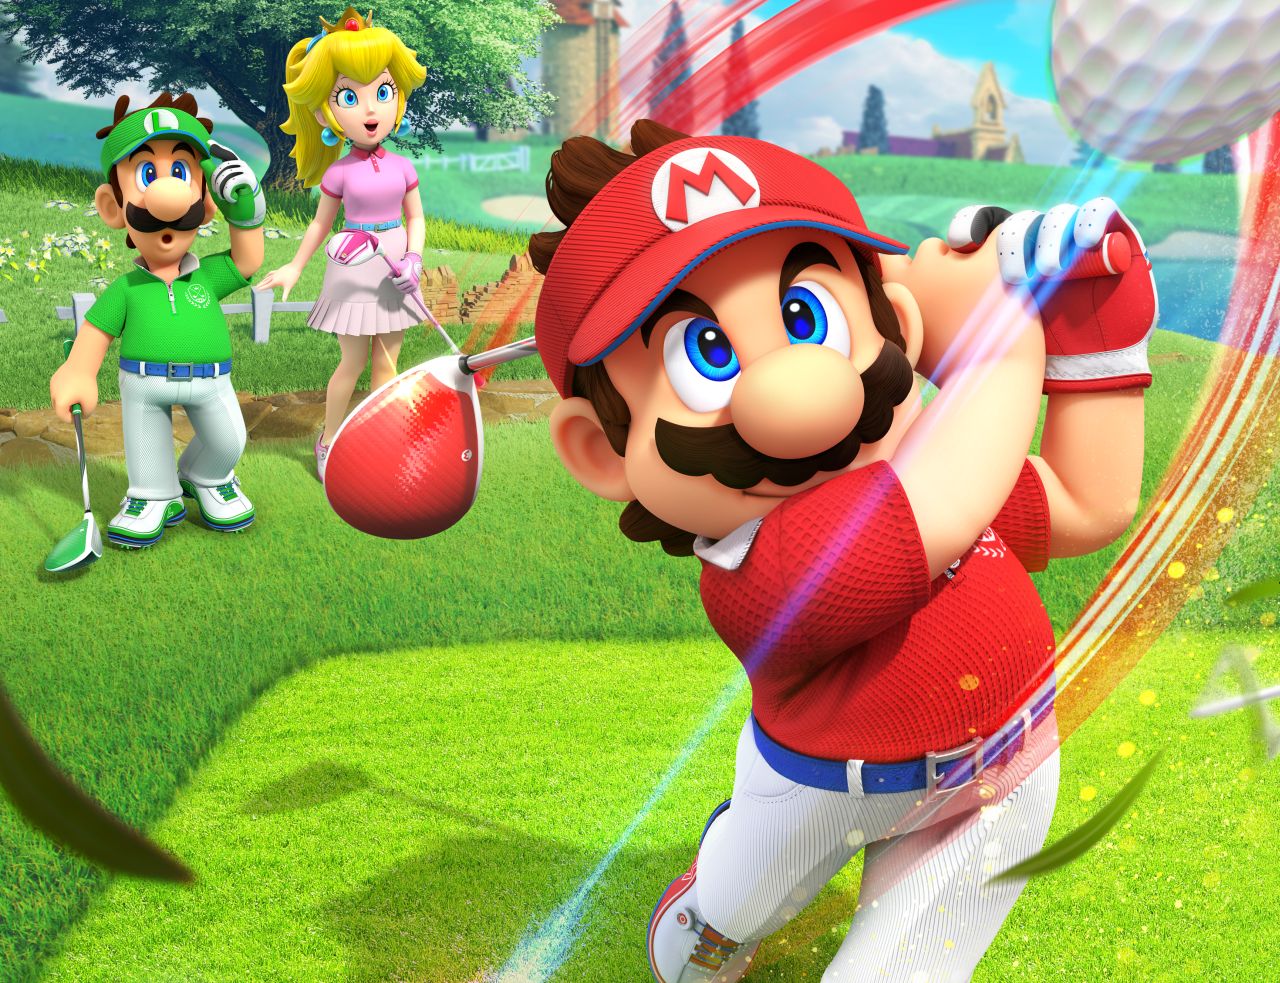 Image for Mario Golf: Super Rush review: great core gameplay, brilliant modes, but a mediocre story adventure